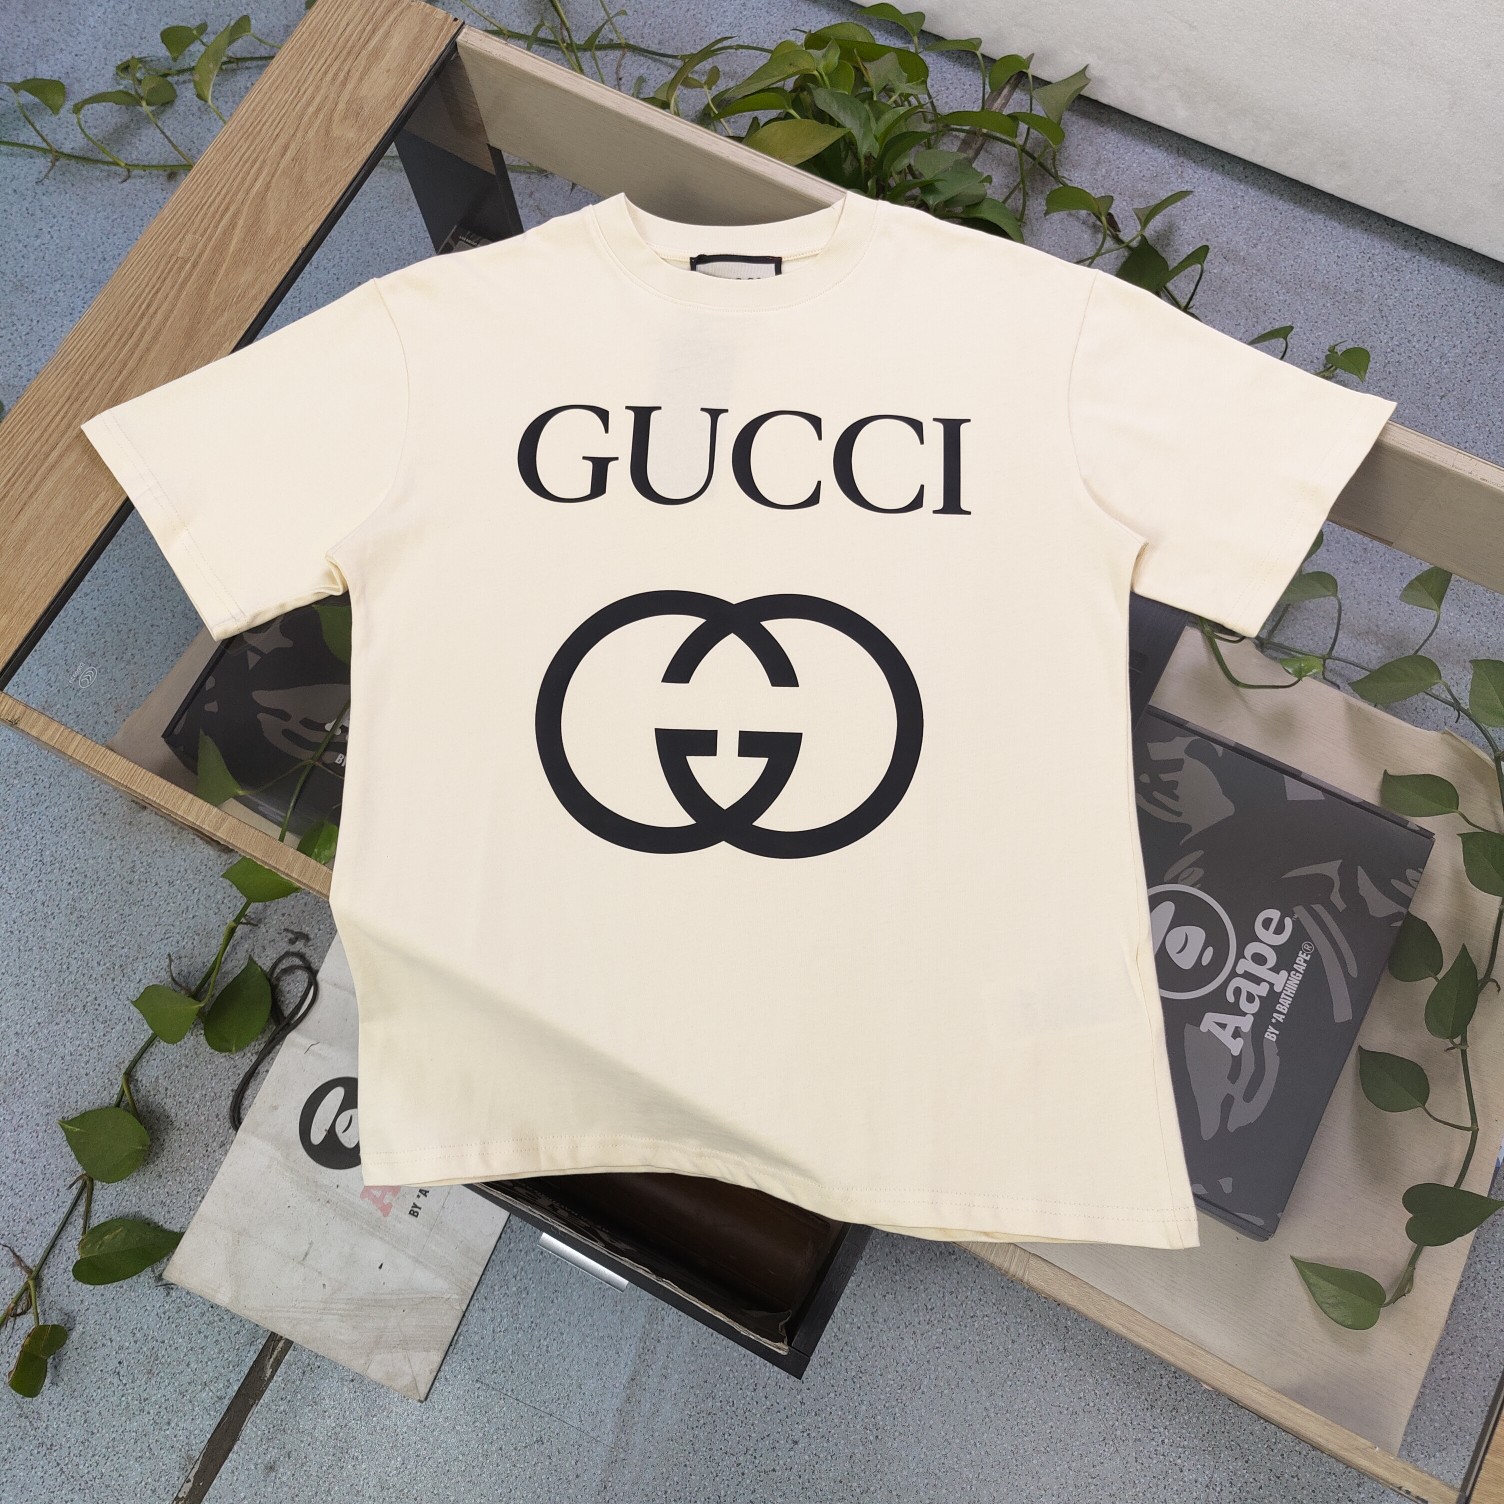 Gucci Sale
 Clothing T-Shirt Apricot Color Black Printing Unisex Cotton Spring/Summer Collection Short Sleeve XD99102